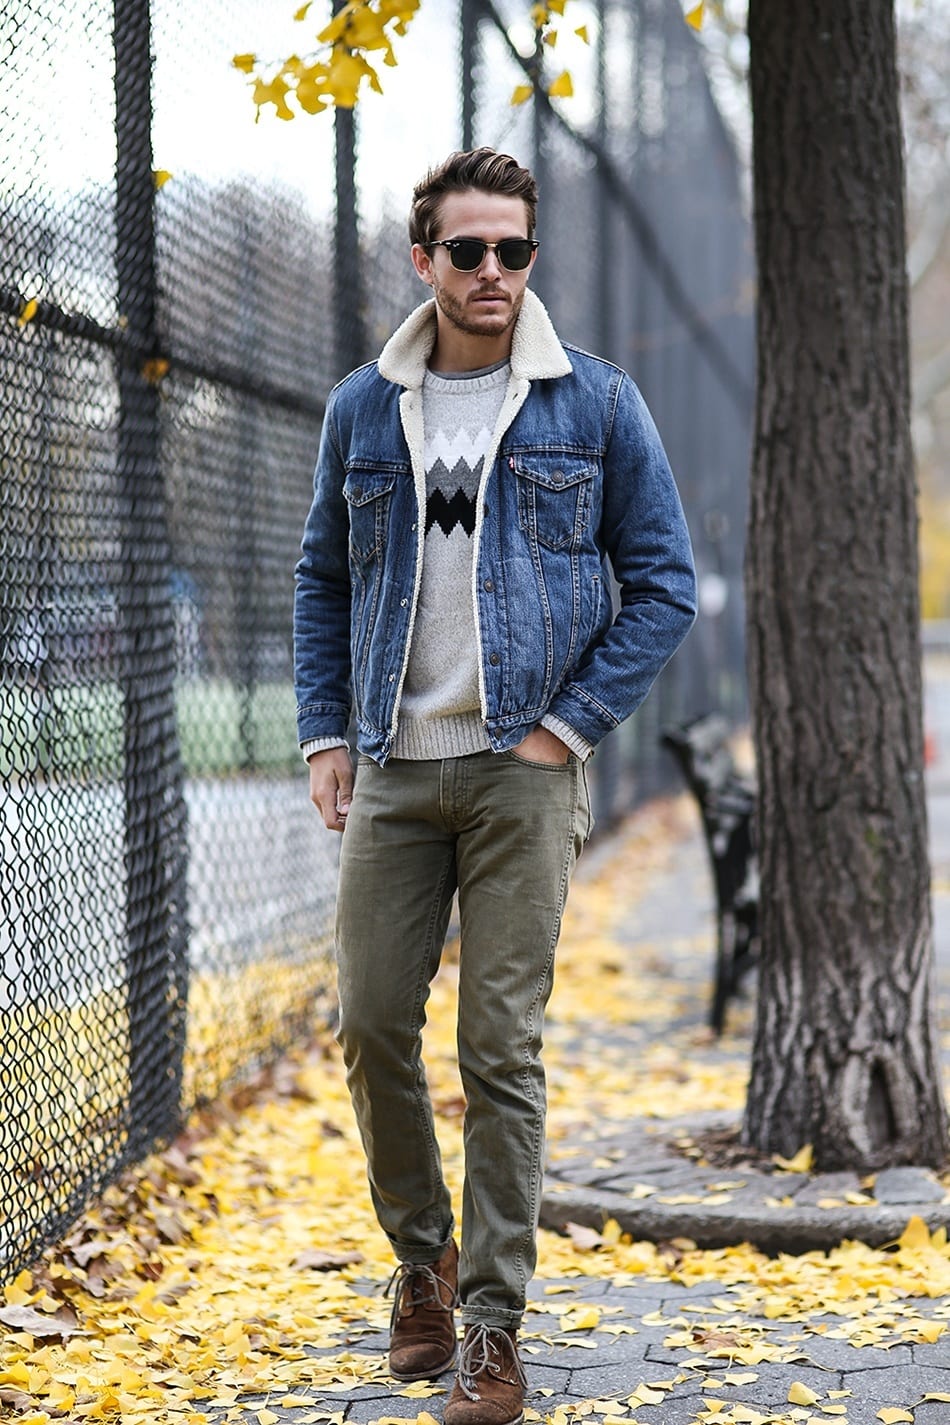 Fall Outfits for Men - 17 Casual Fashion Ideas This Fall